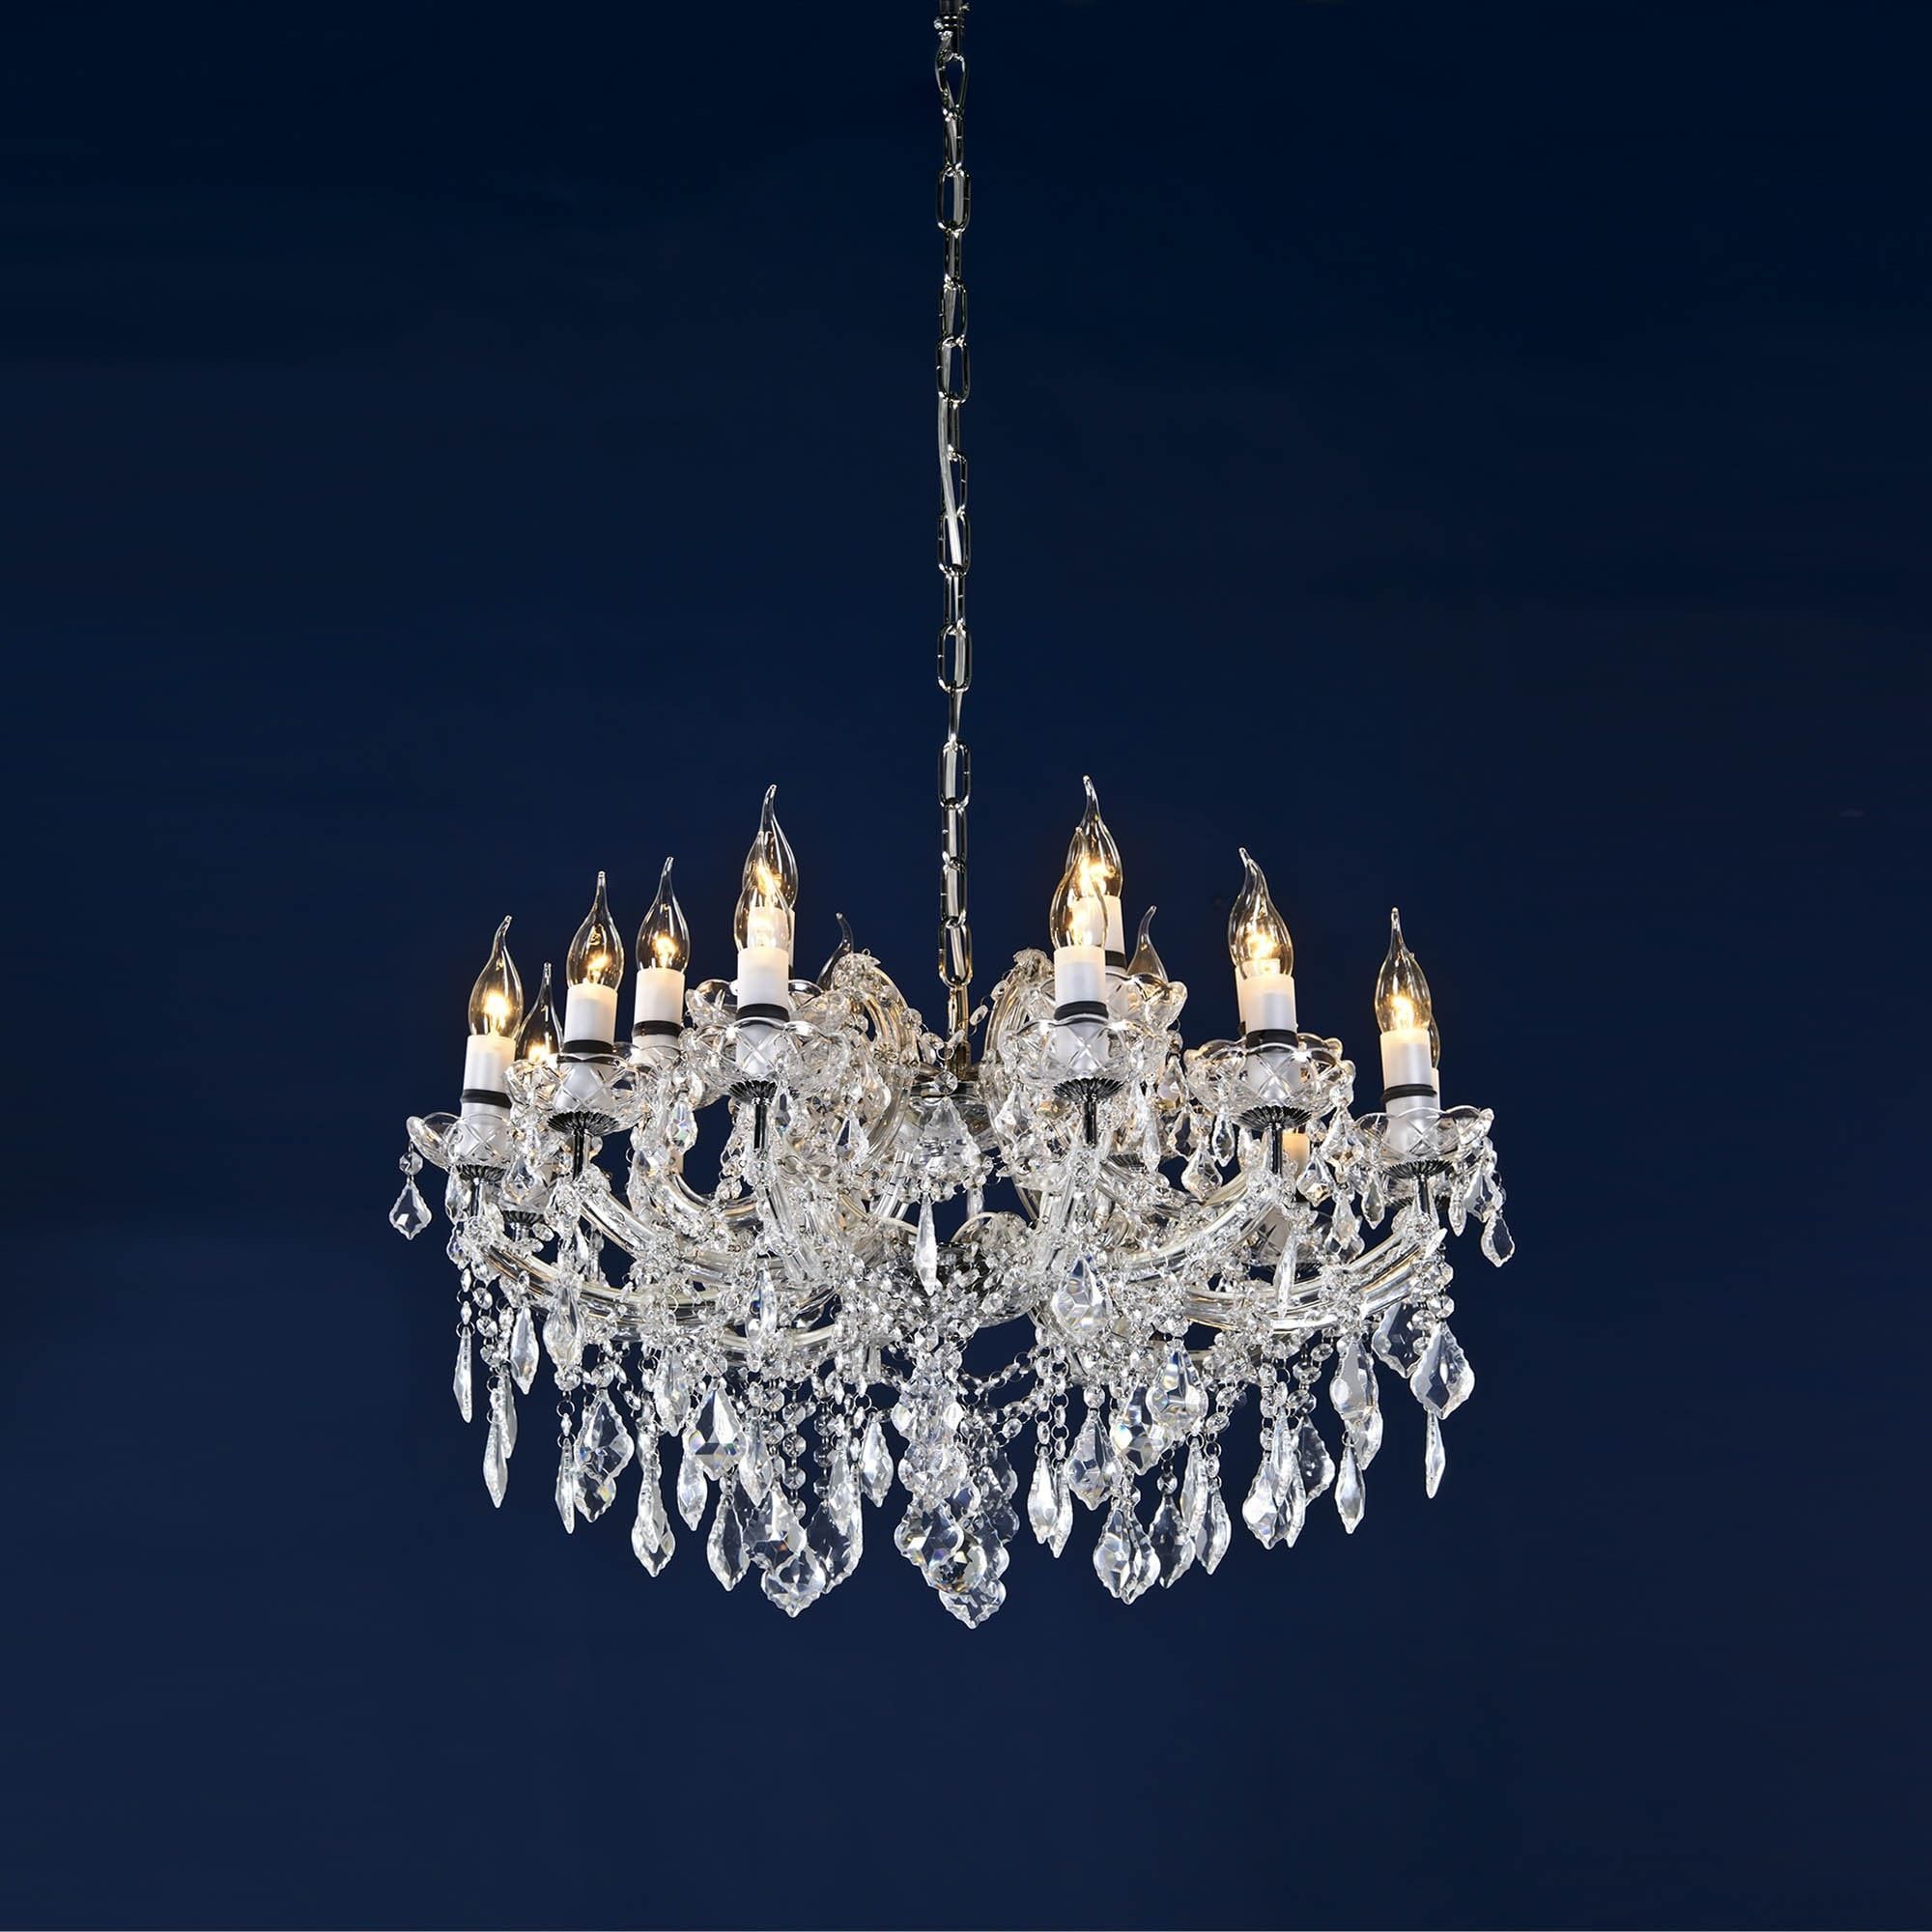 Chrome Crystal 18 Light Chandelier | French Lighting Inside Chrome And Crystal Led Chandeliers (View 3 of 15)